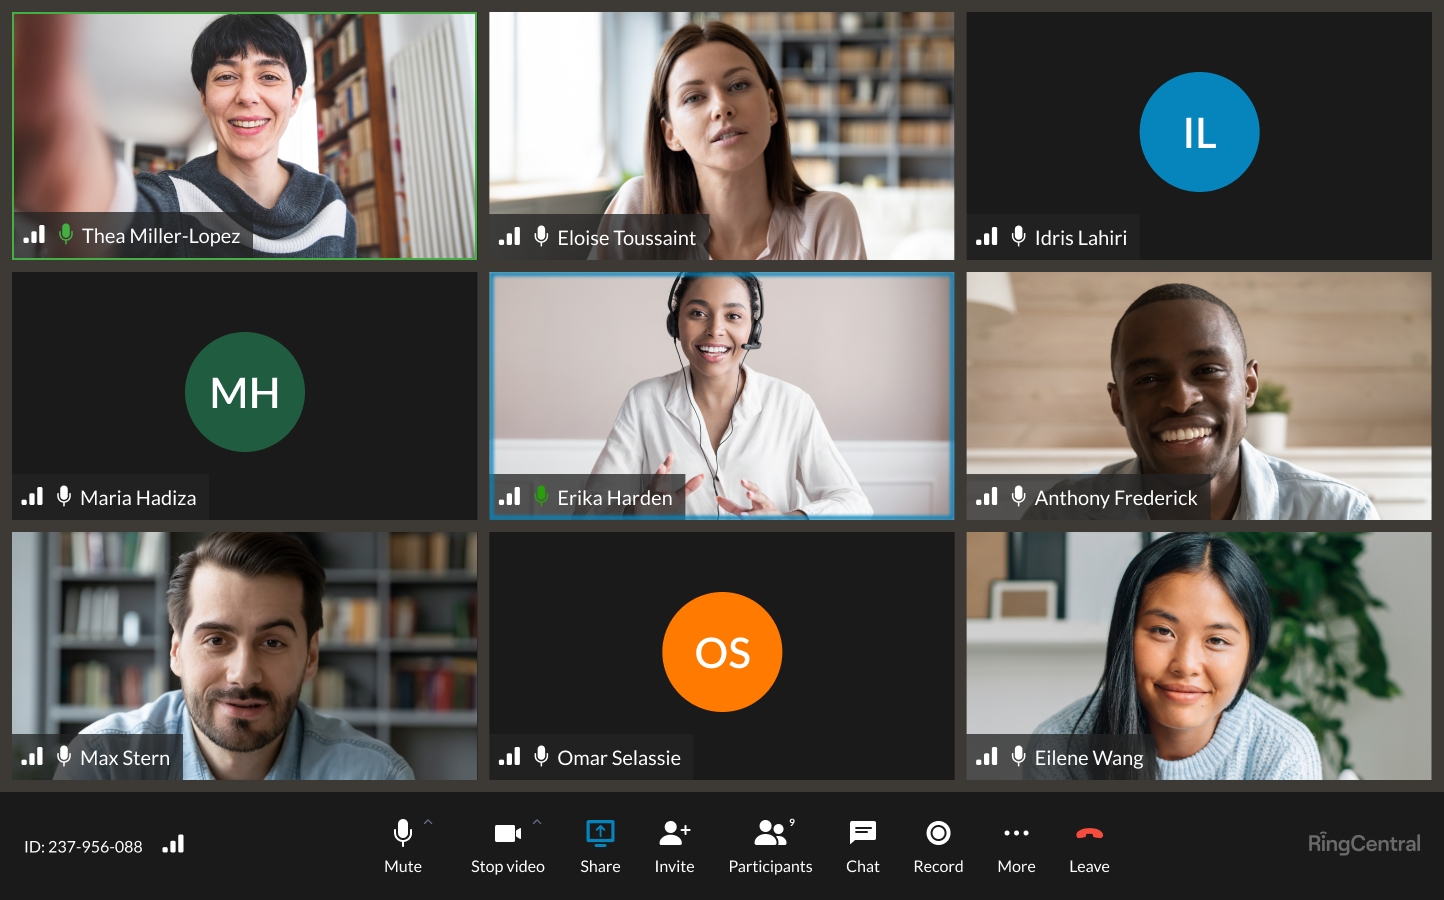 RingCentral video